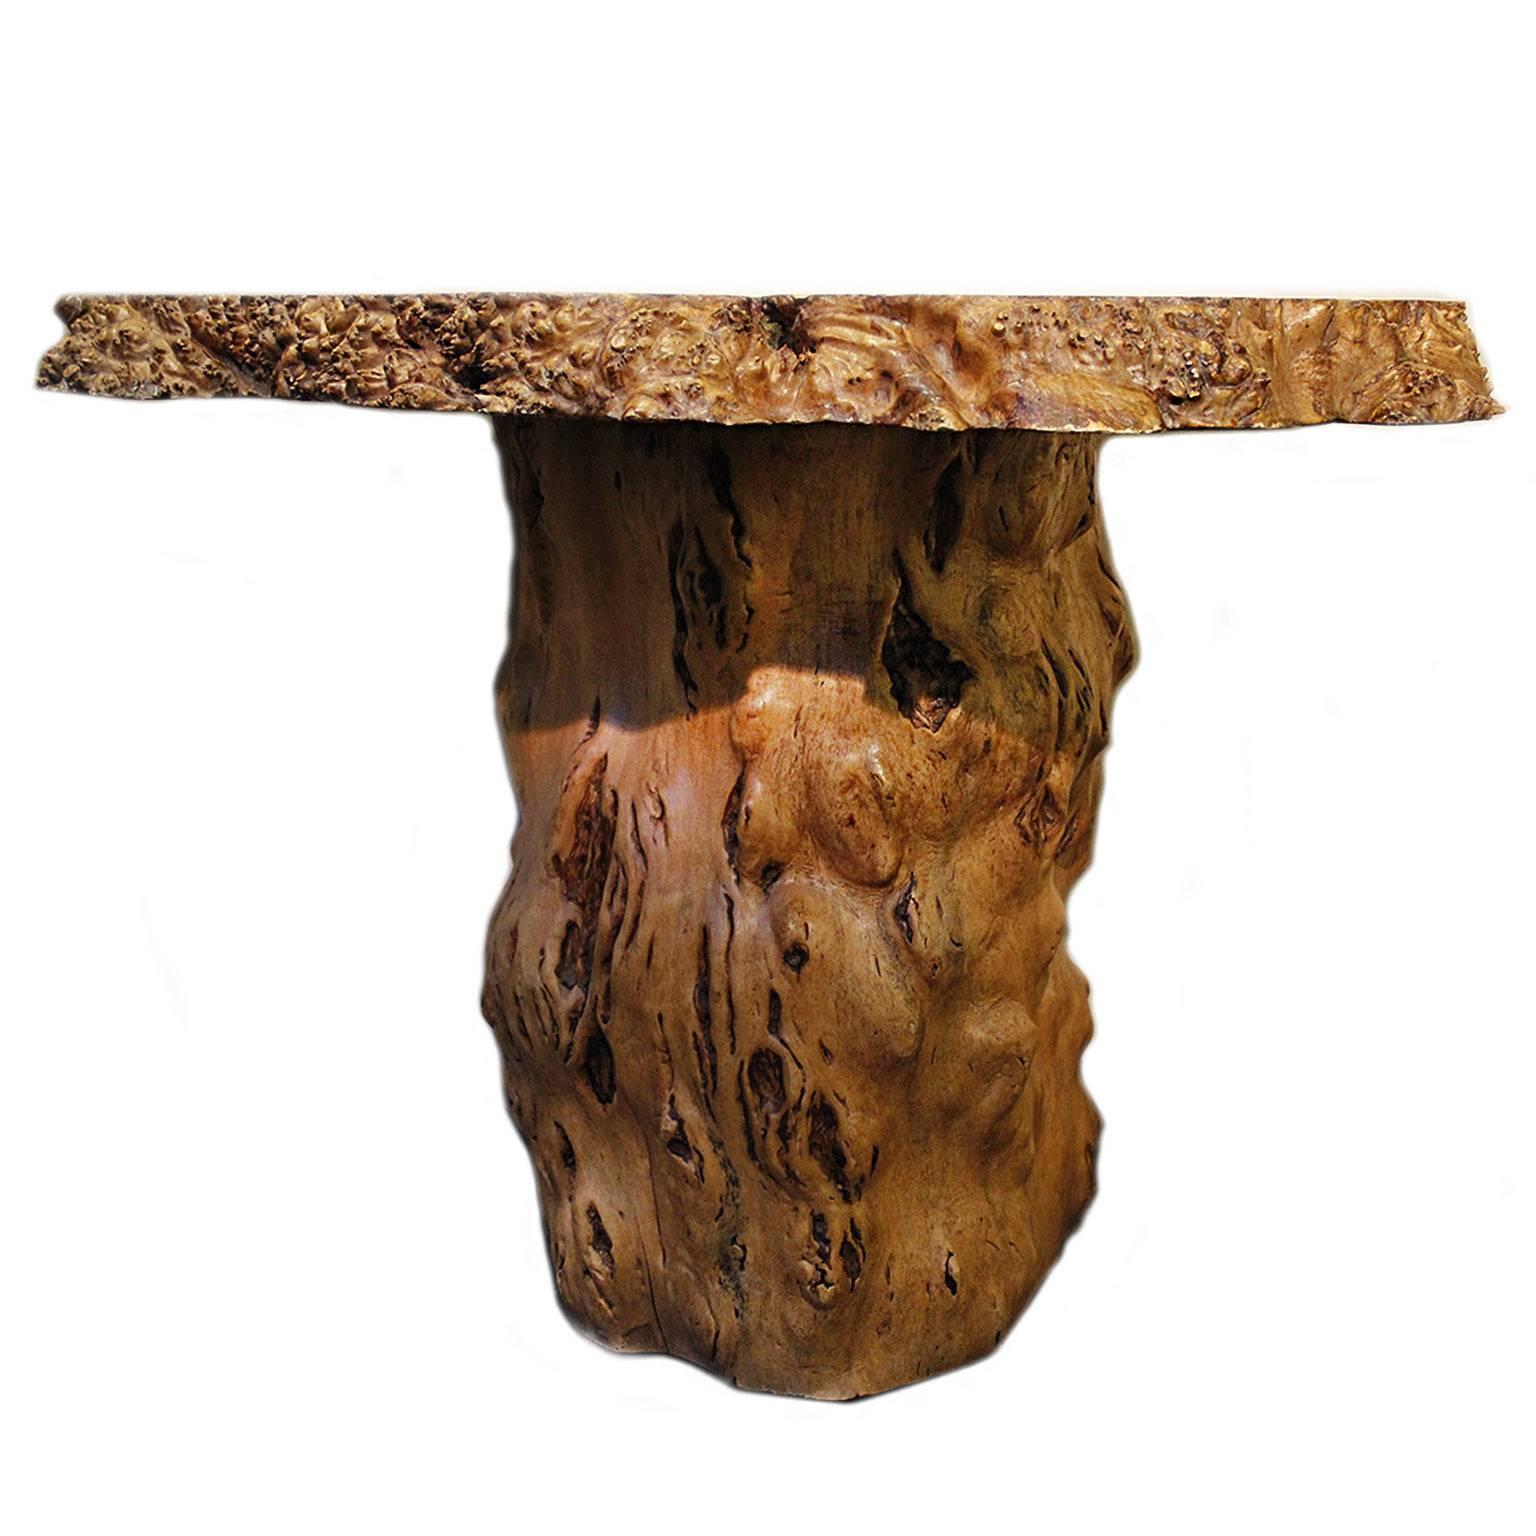 Natural Rootwood form console table with scalloped edge top.

Dimensions: 33.07 in. H x 41.33 in. W x 33.46 in. D
84 cm. H x 105 cm. W x 85 cm. D.